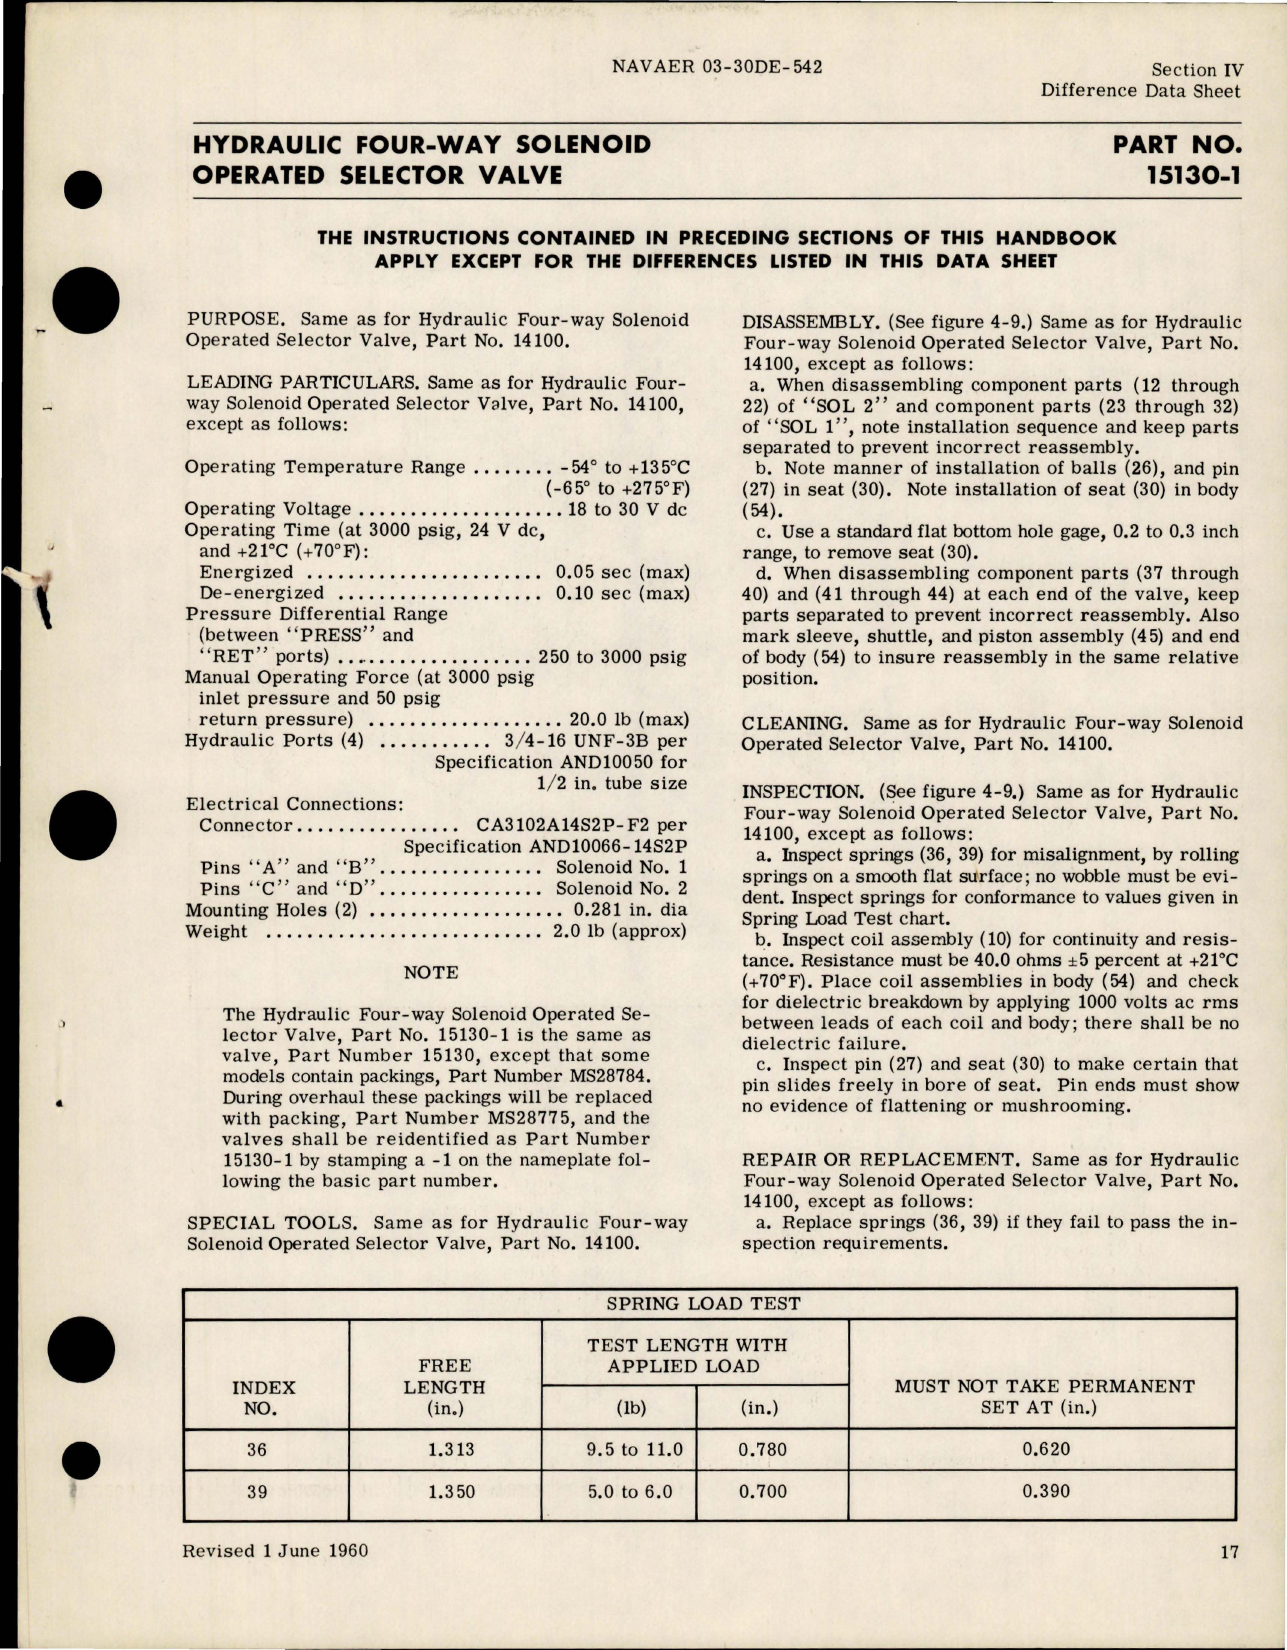 Sample page 5 from AirCorps Library document: Overhaul Instructions for Hydraulic Four Way Solenoid Operated Selector Valves - Parts 14100, 14740, 15130 and 15130-1